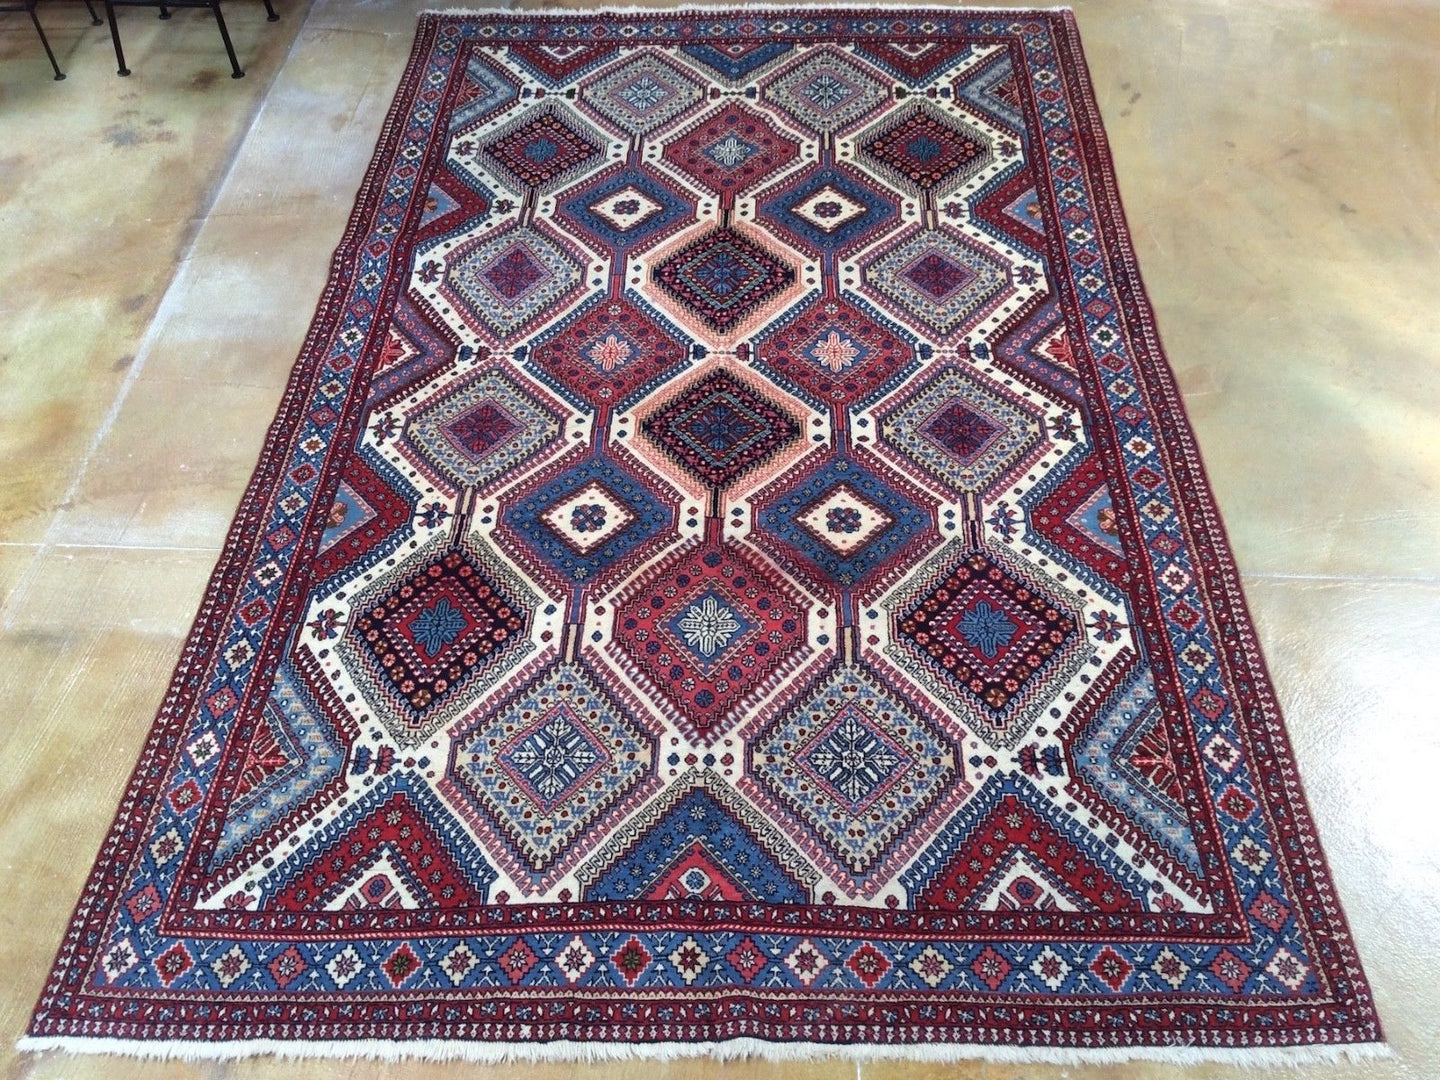 Oriental rugs, hand-knotted carpets, sustainable rugs, classic world oriental rugs, handmade, United States, interior design,  Brrsf-357